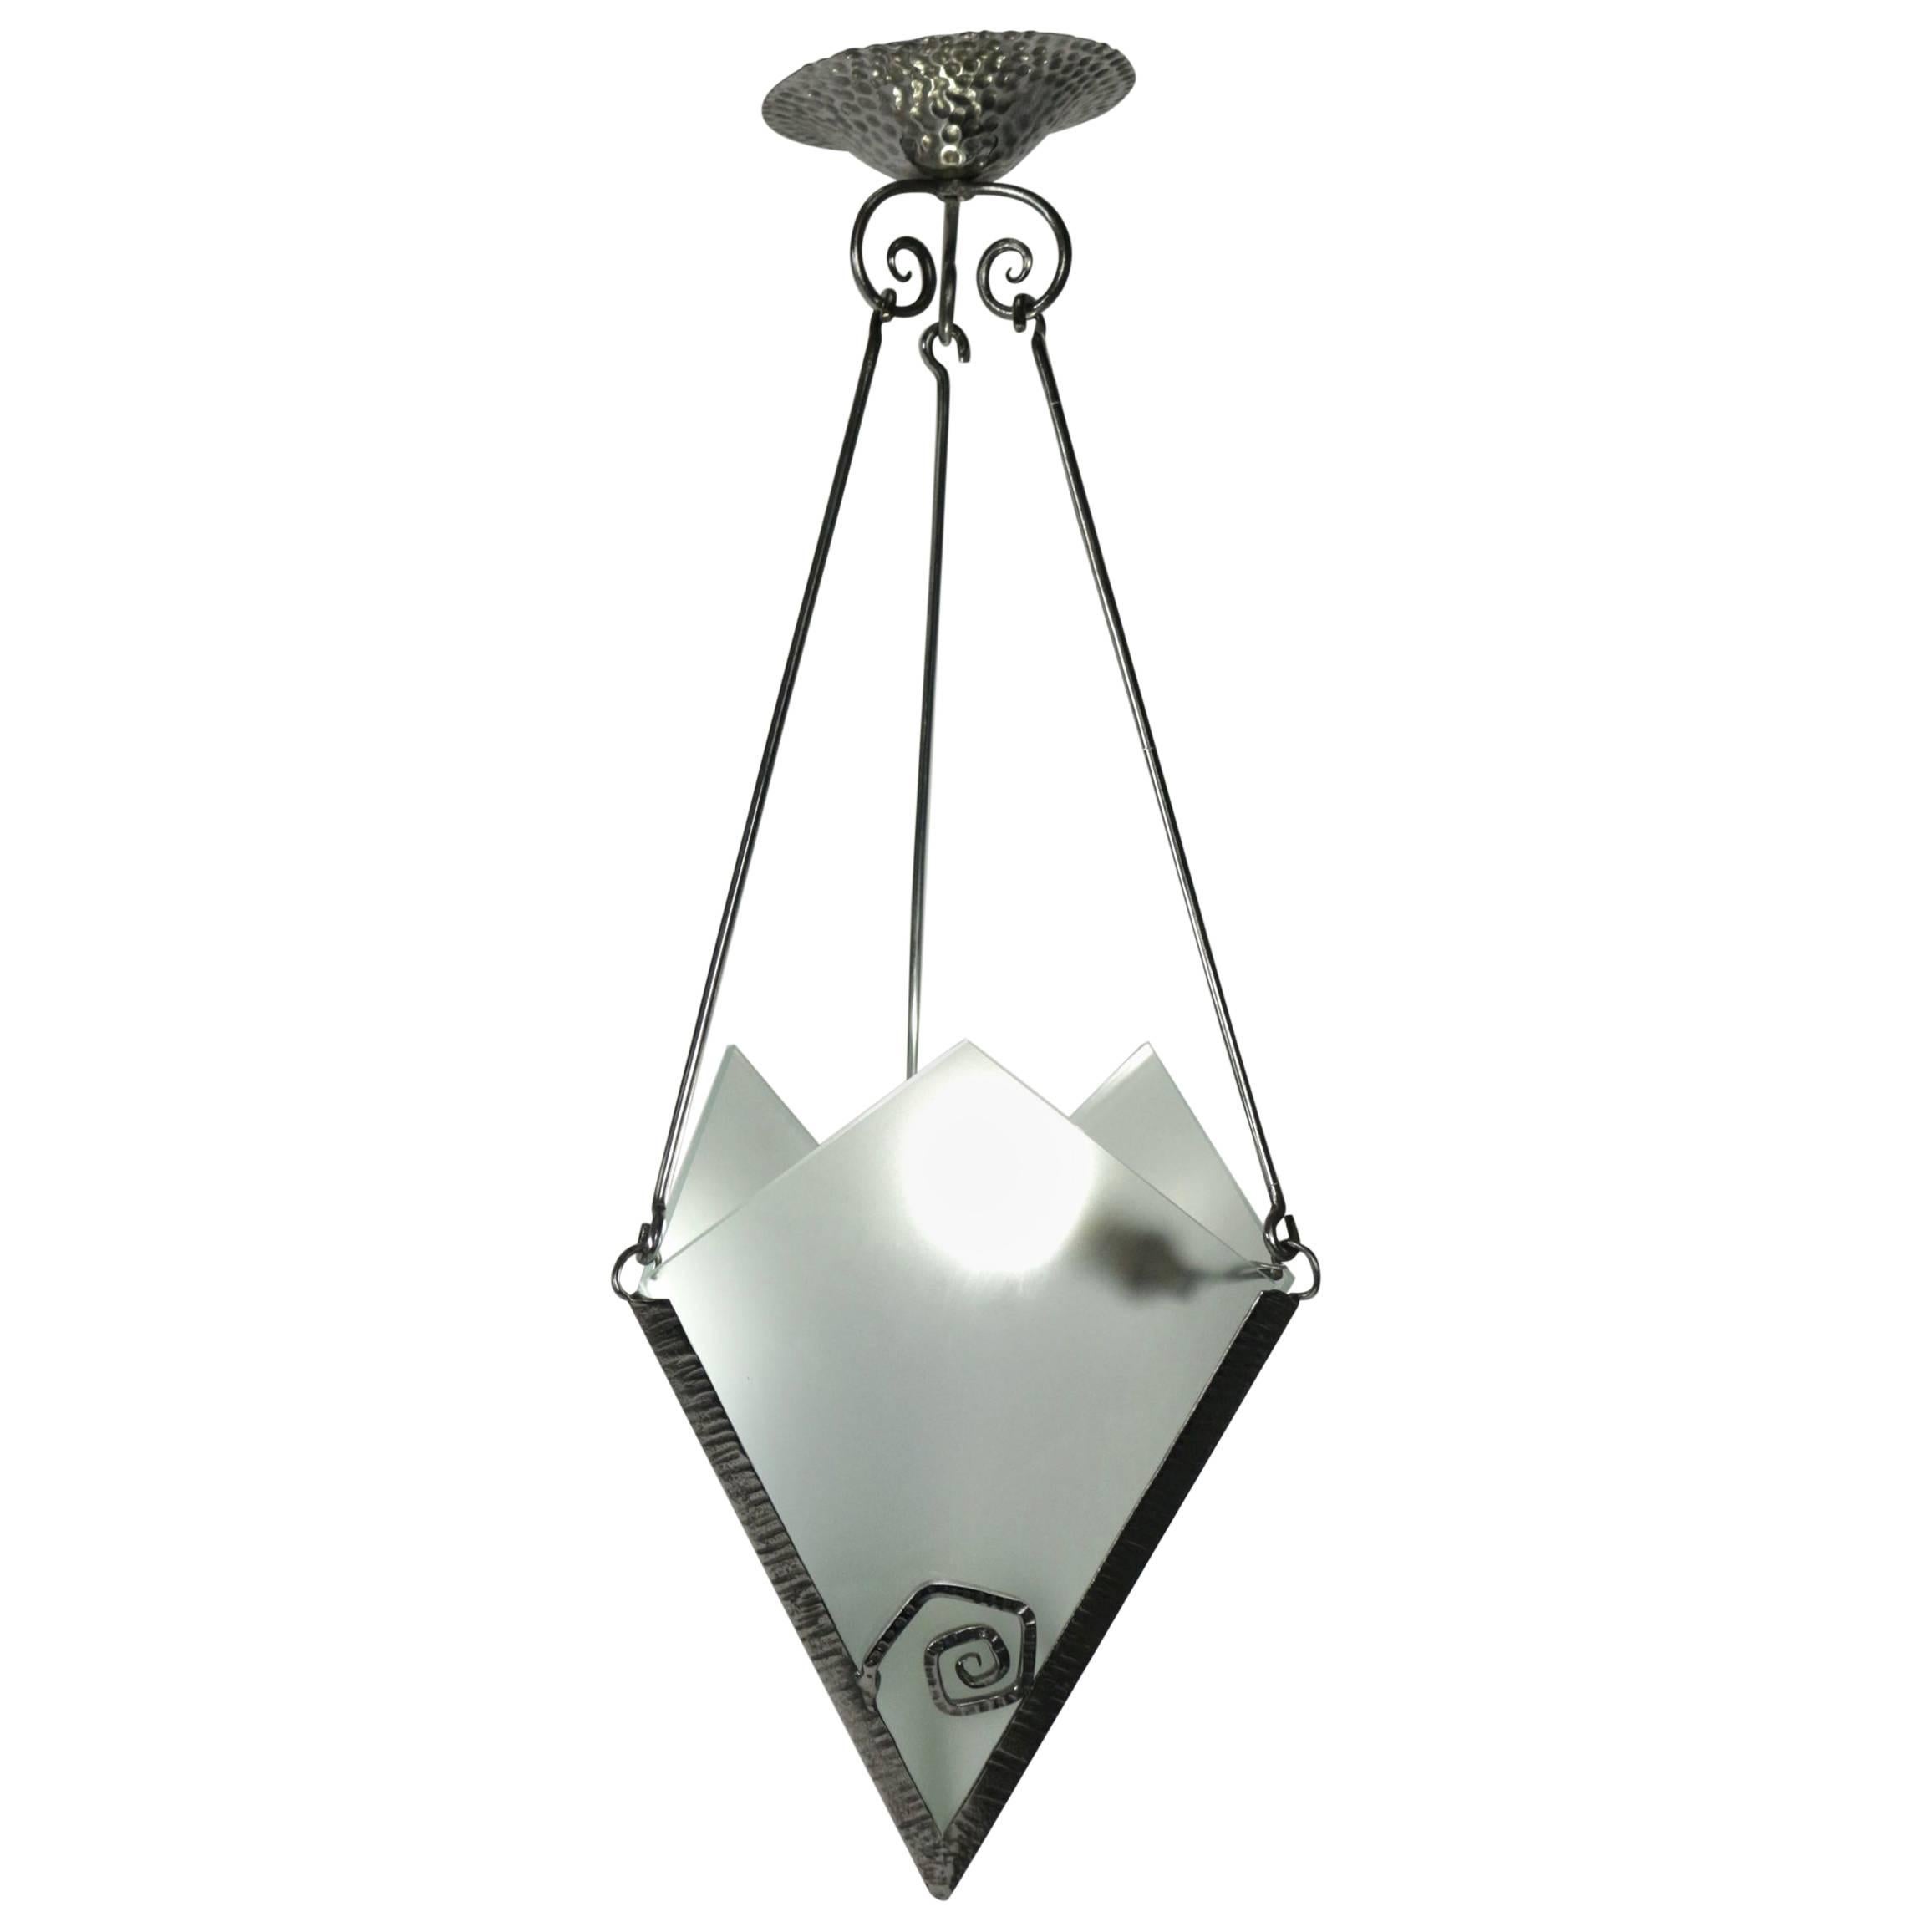 Pretty Small Art Deco Light Fixture in Etched Glass and Steel, circa 1930